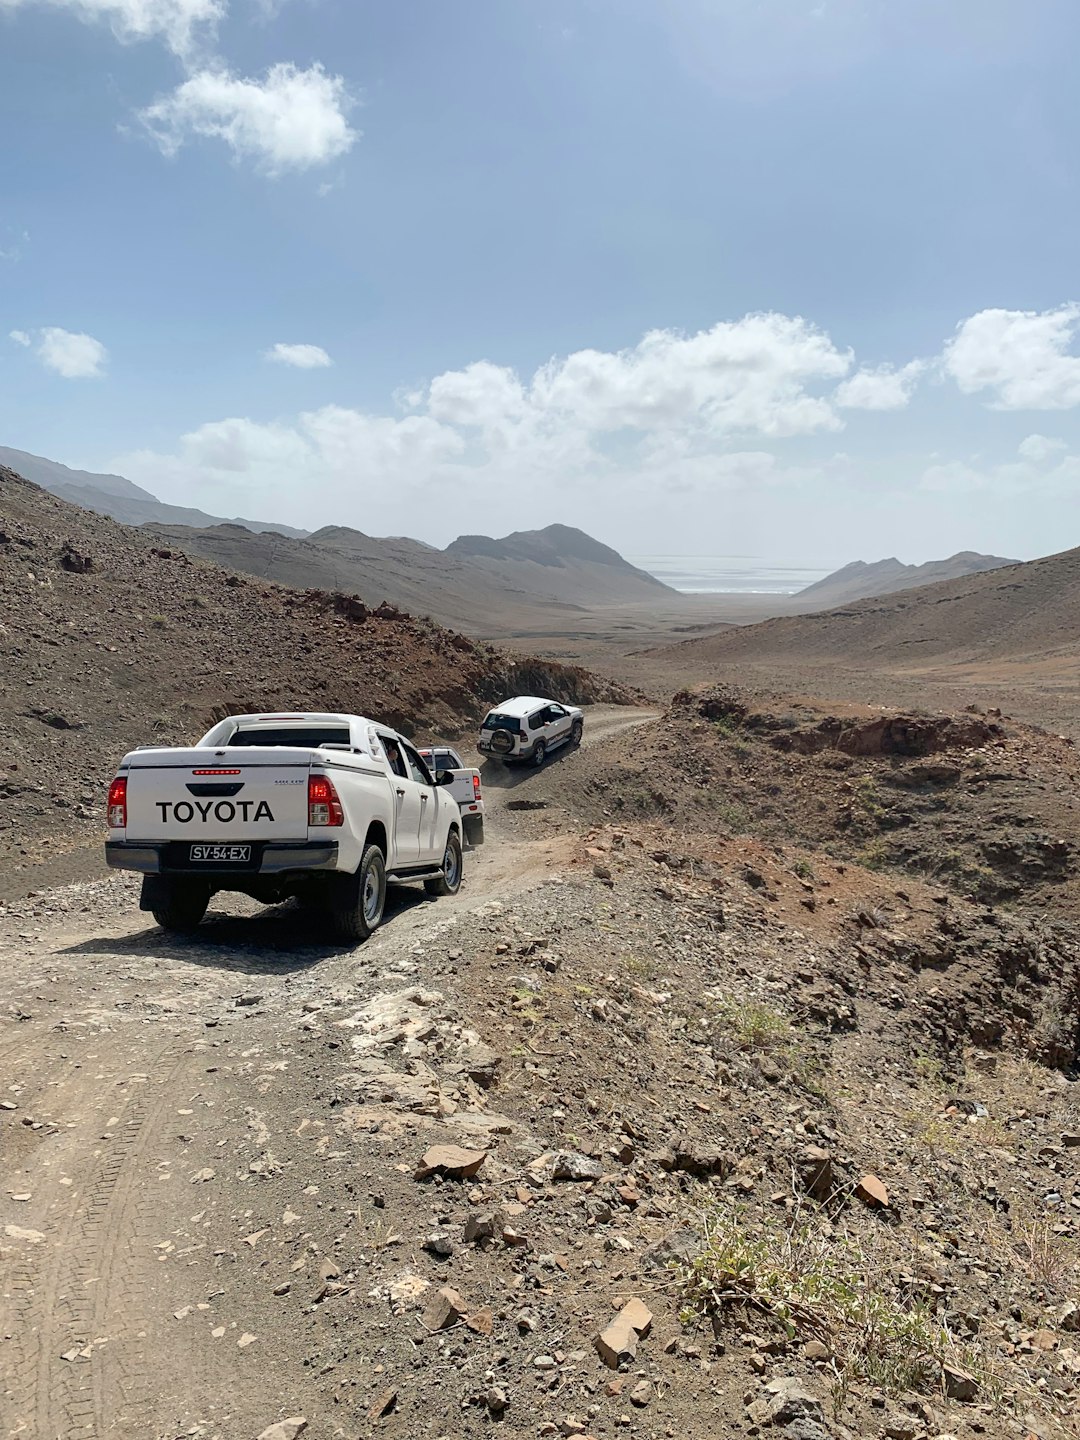 travelers stories about Mountain in São Vicente, Cape Verde